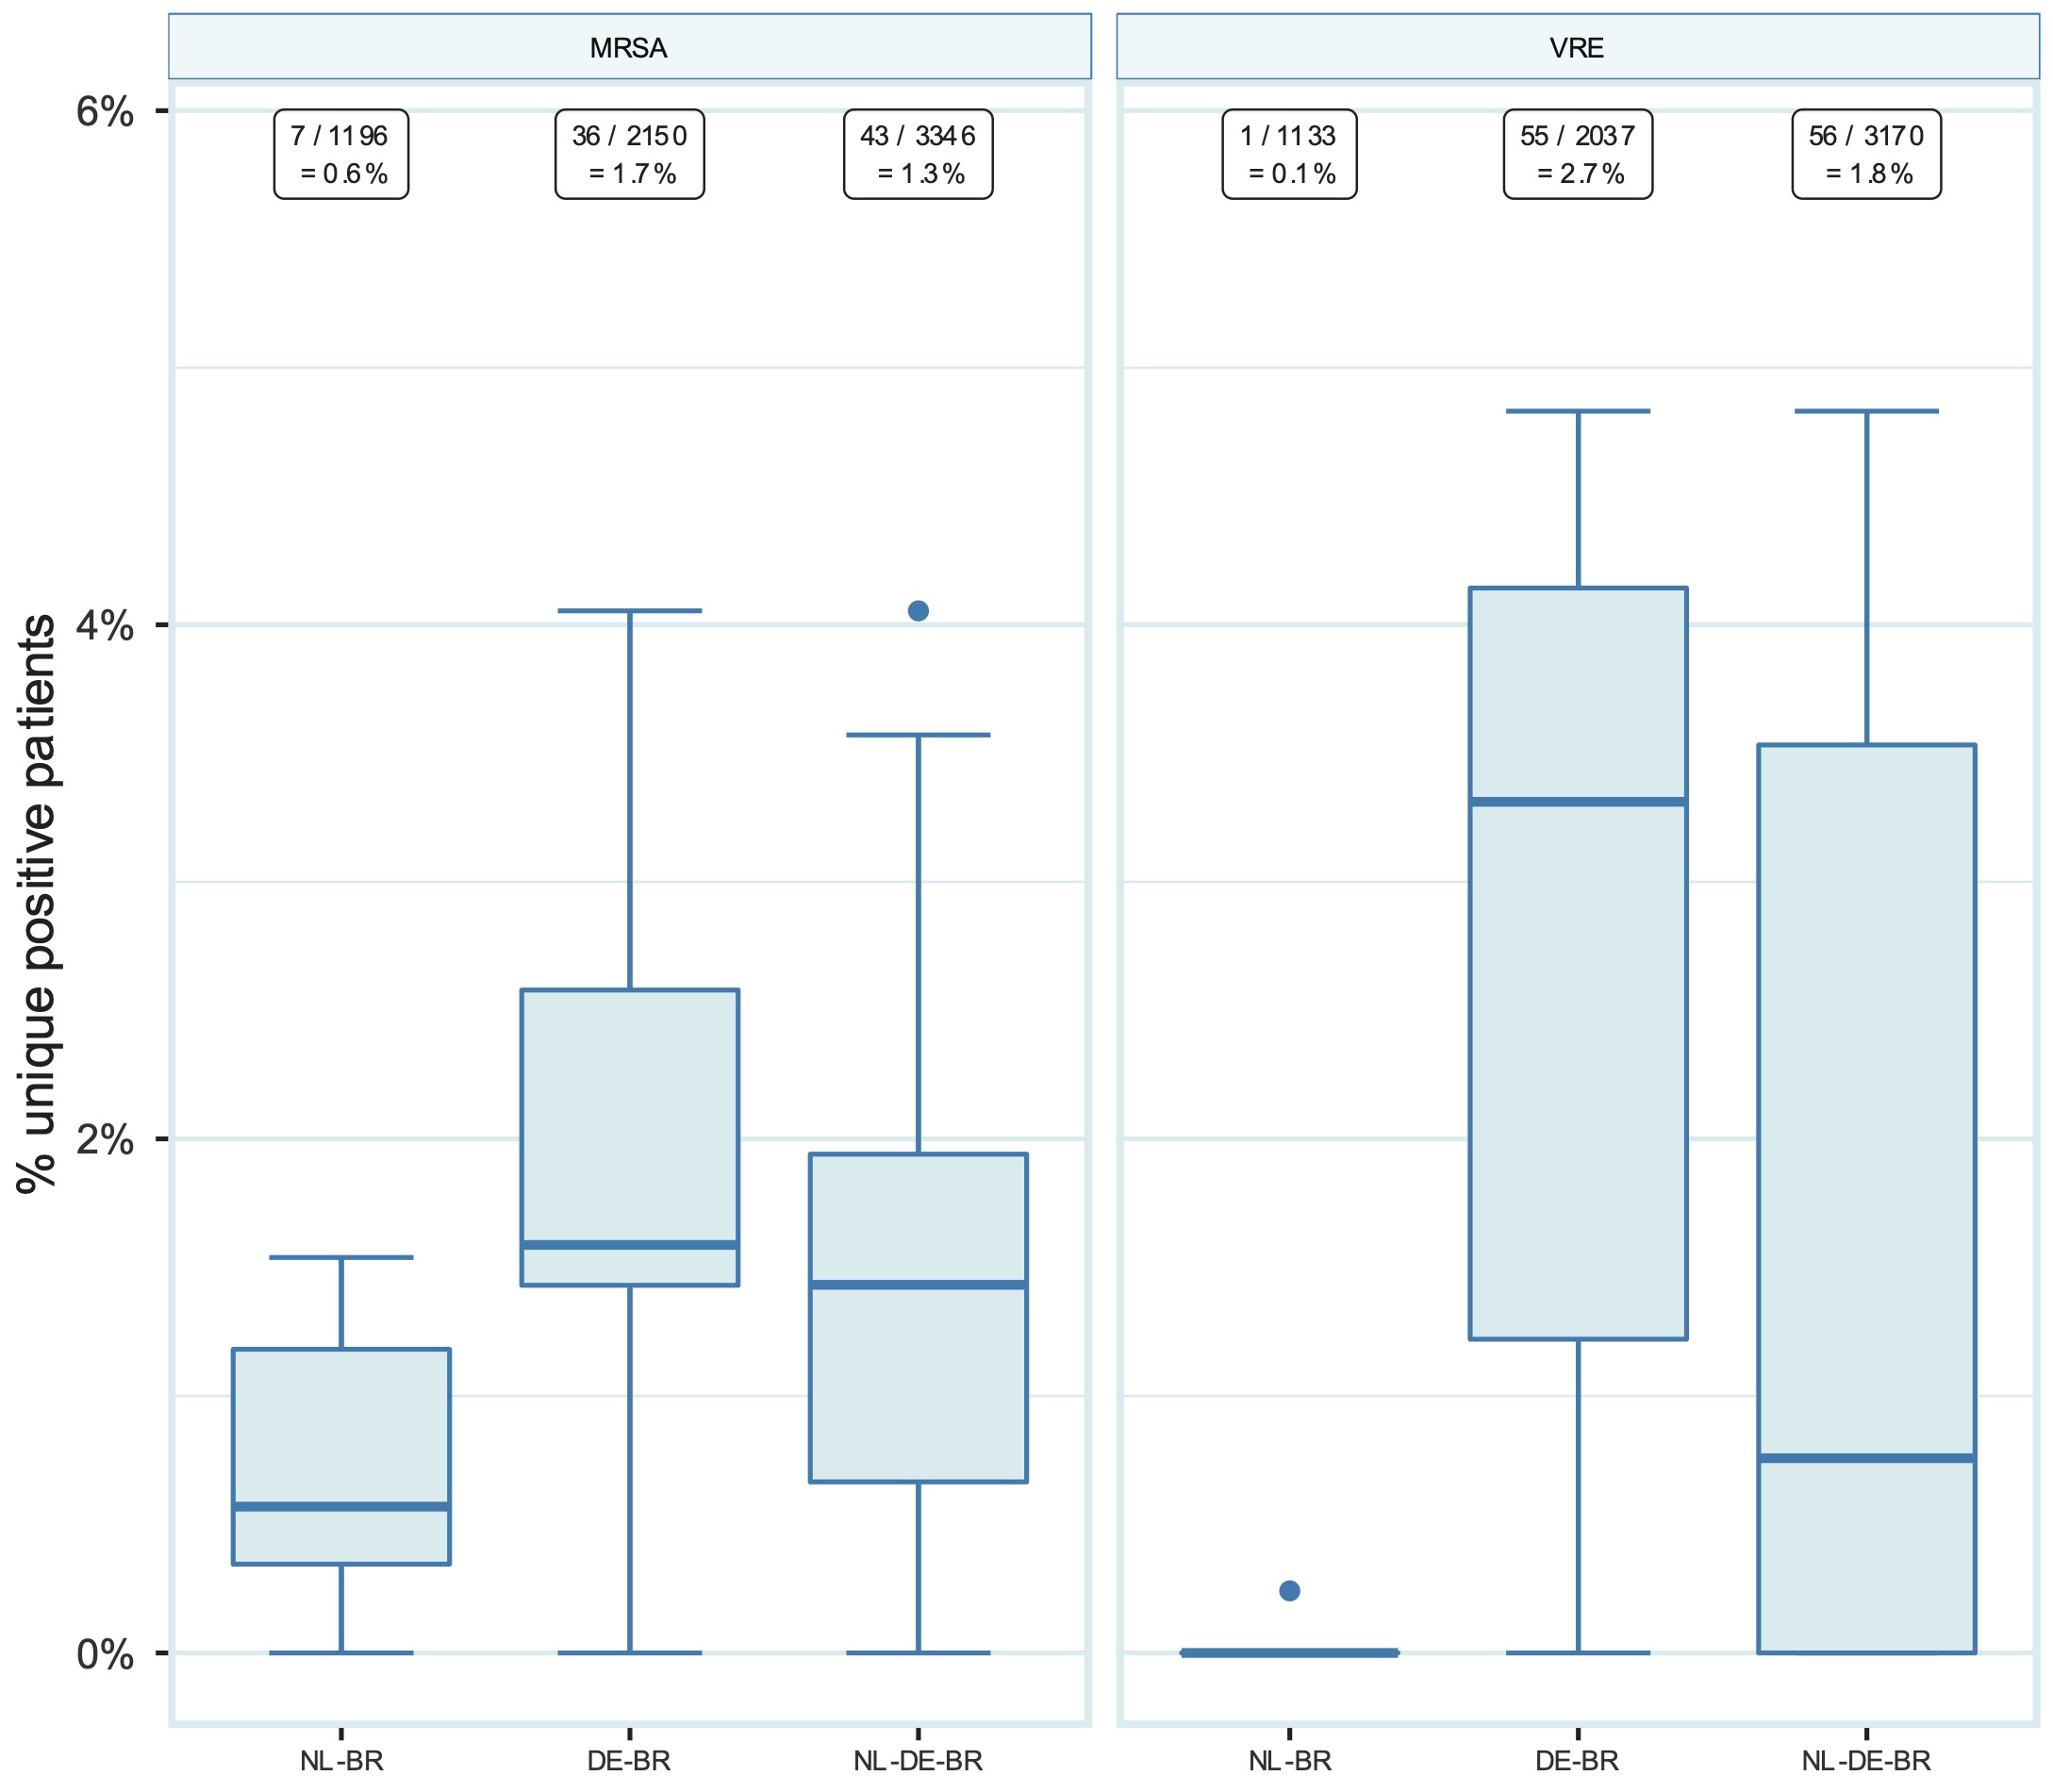 Prevalence of MRSA and VRE in NL-BR ICUs, in DE-BR ICUs and in both cross-border regions together (NL-DE-BR ICUs). Numbers above in squares represent the number of positive patients divided by the total number of patients screened for the respective pathogen with the calculated prevalence. Boxplots show the median prevalence in participating ICUs (thick line within each box), the first and third quartile (upper and lower border of the box, the difference is the IQR), and the whiskers with error bars represent 1.5 times the IQR denoting the normal range. The dots are outside this range. DE-BR: German cross-border region; ICU: intensive care unit; IQR: interquartile range; MRSA: methicillin-resistant *Staphylococcus aureus*; NL-BR: Dutch cross-border region; NL-DE-BR: total Dutch-German cross-border region; VRE: vancomycin-resistant enterococci.